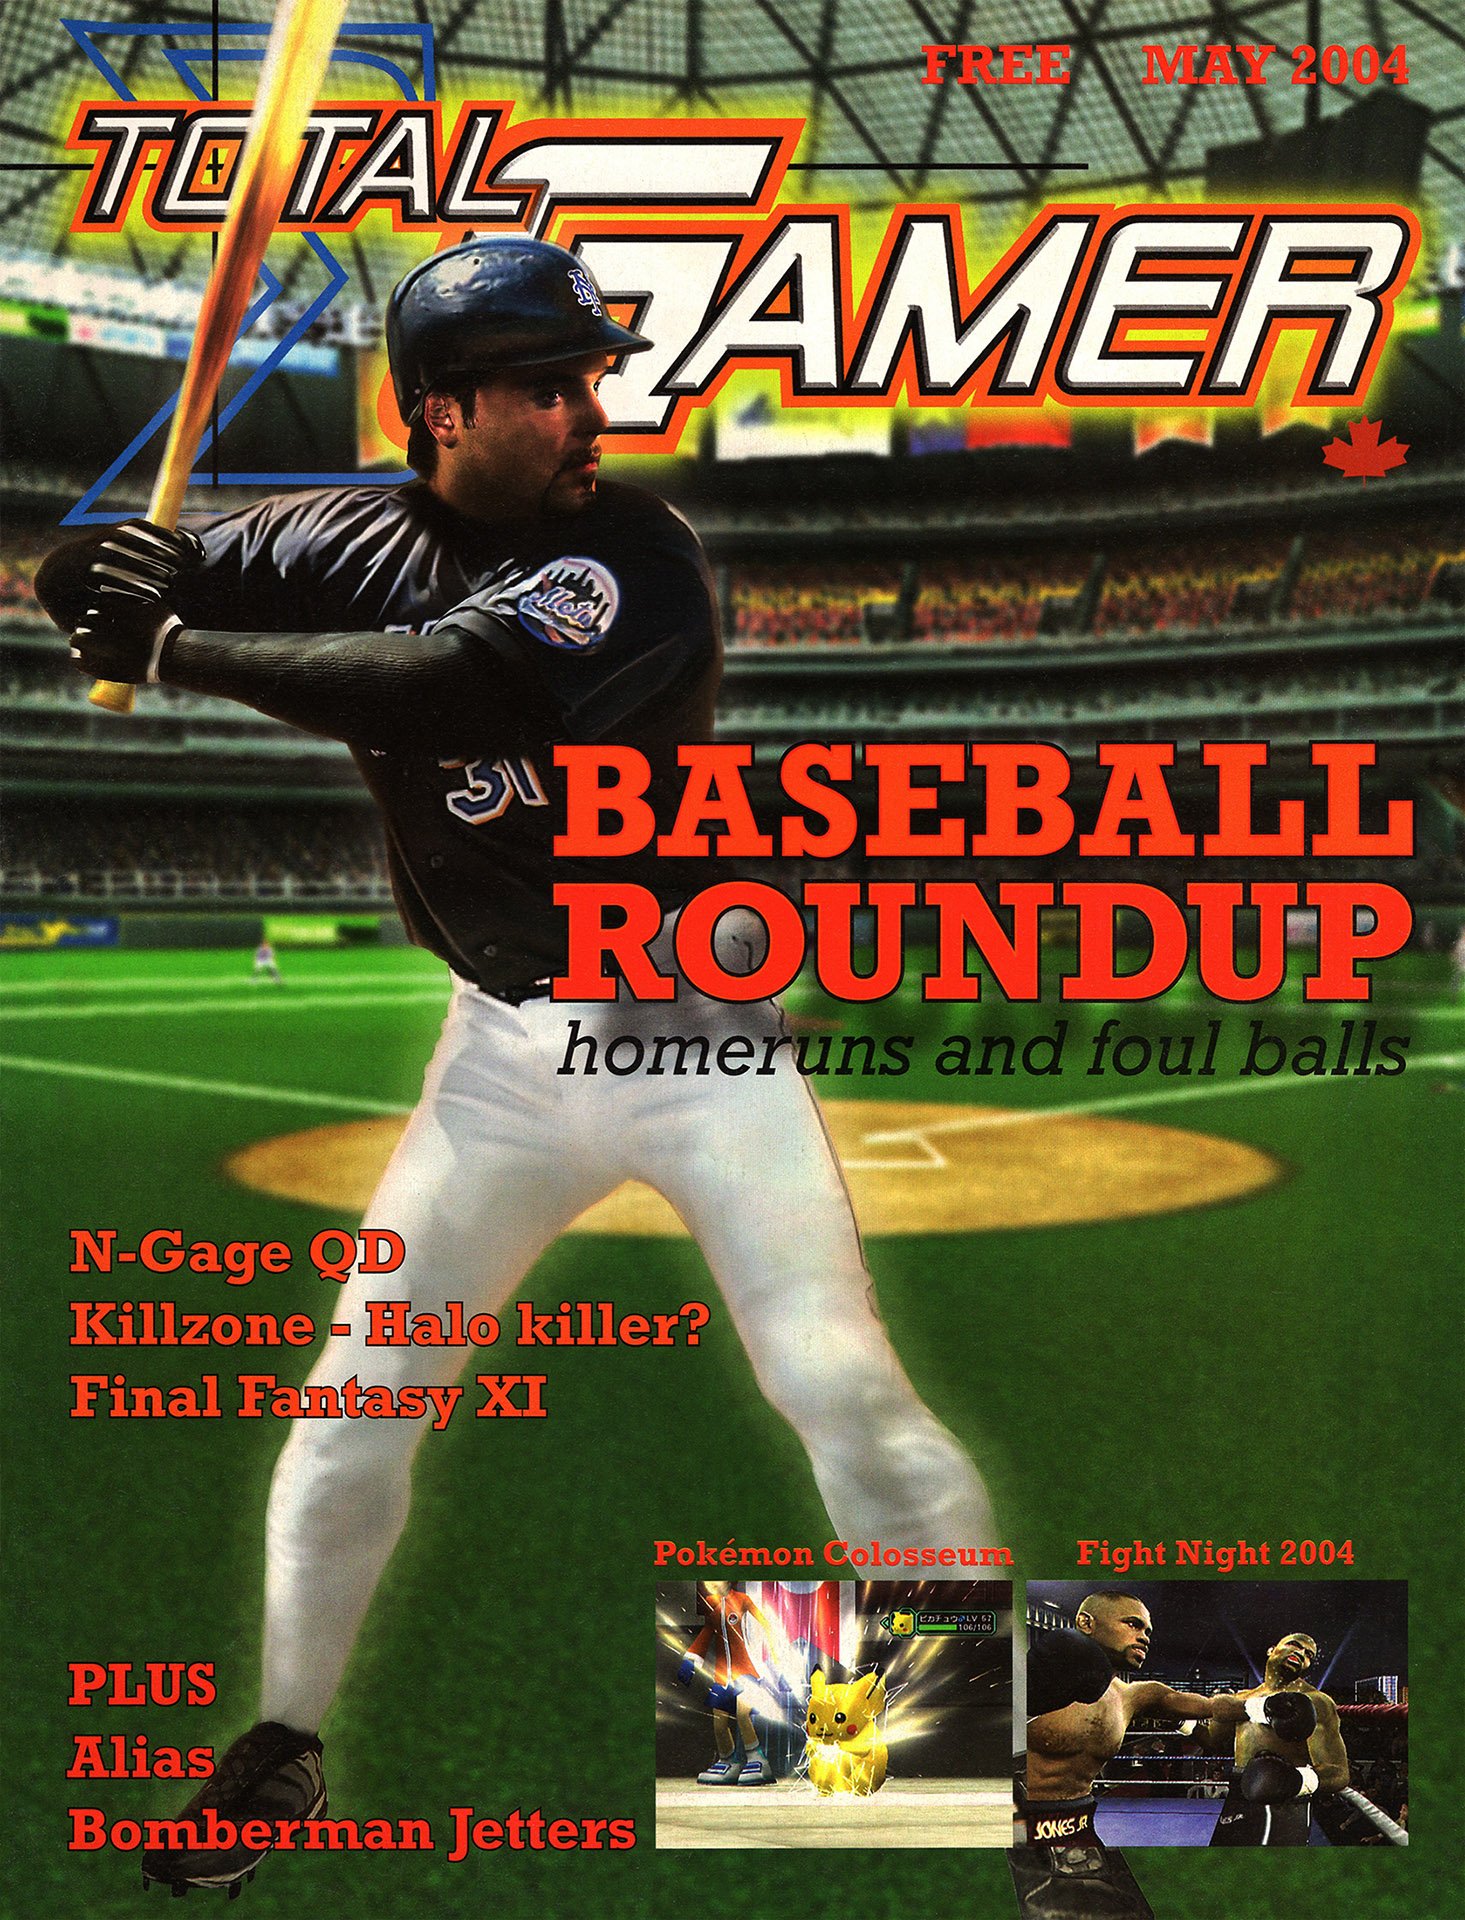 More information about "Total Gamer (May 2004)"